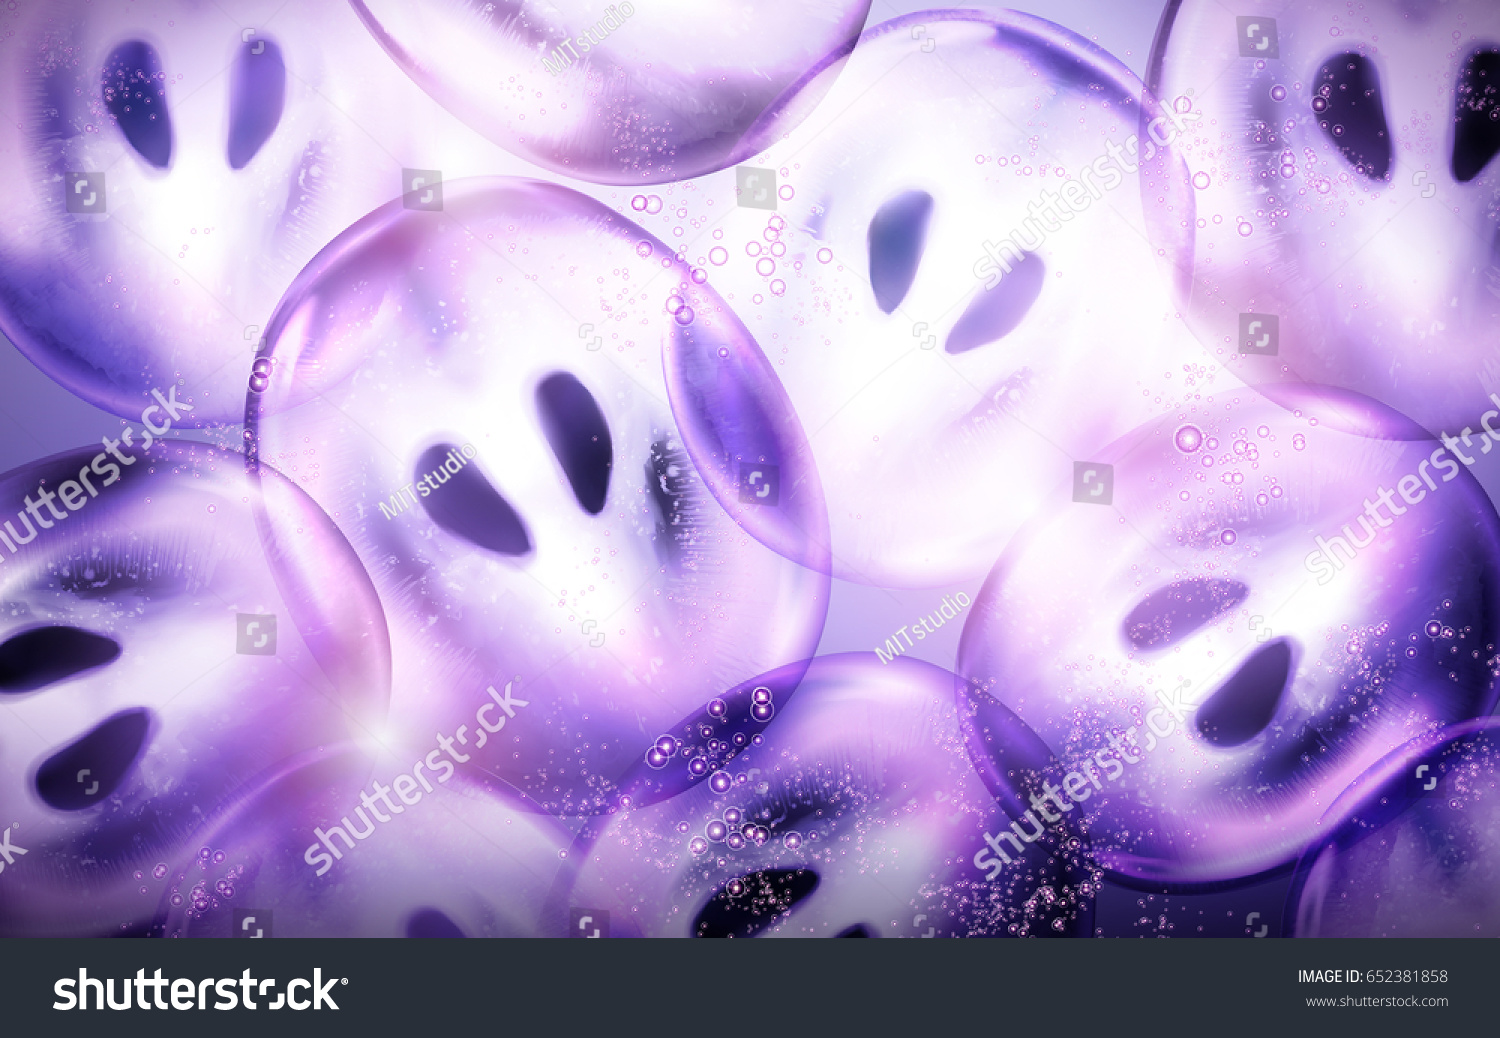 grape flesh and seed elements, can be used as design elements, purple background 3d illustration #652381858